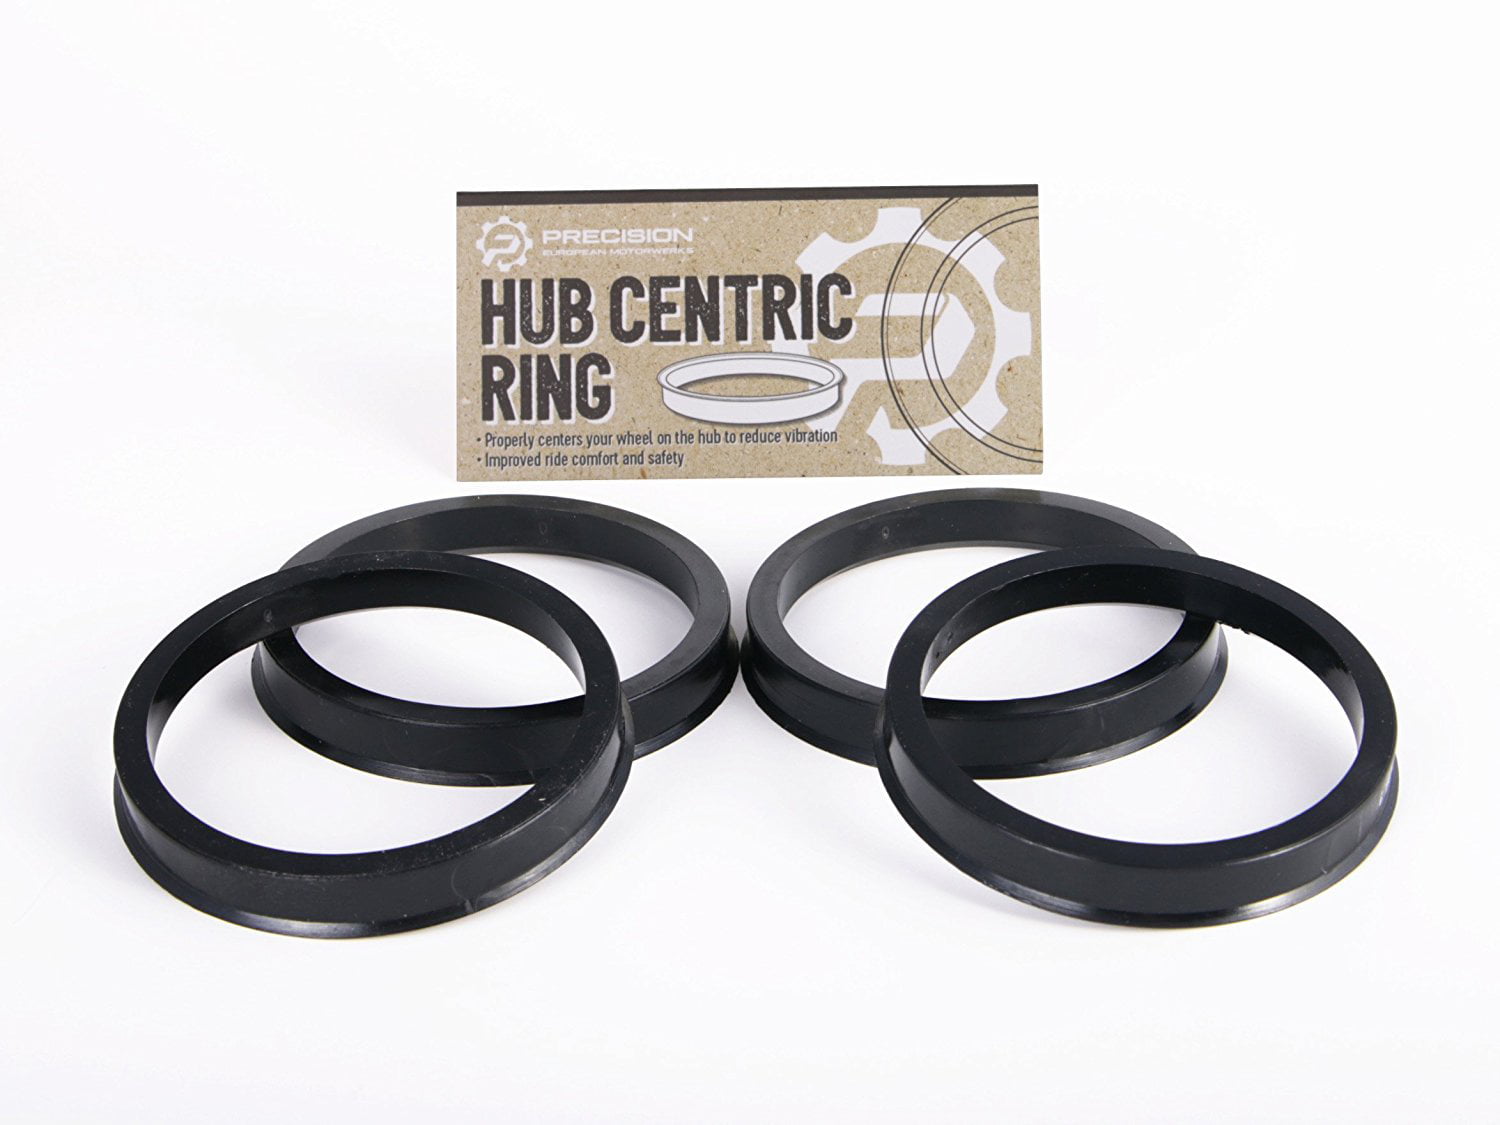 Black Poly Carbon Plastic HUBRINGS XPD OFF ROAD ZELIDON Wheel Accessories HUBCENTRIC Rings Pack of 4 73.1-54.1 